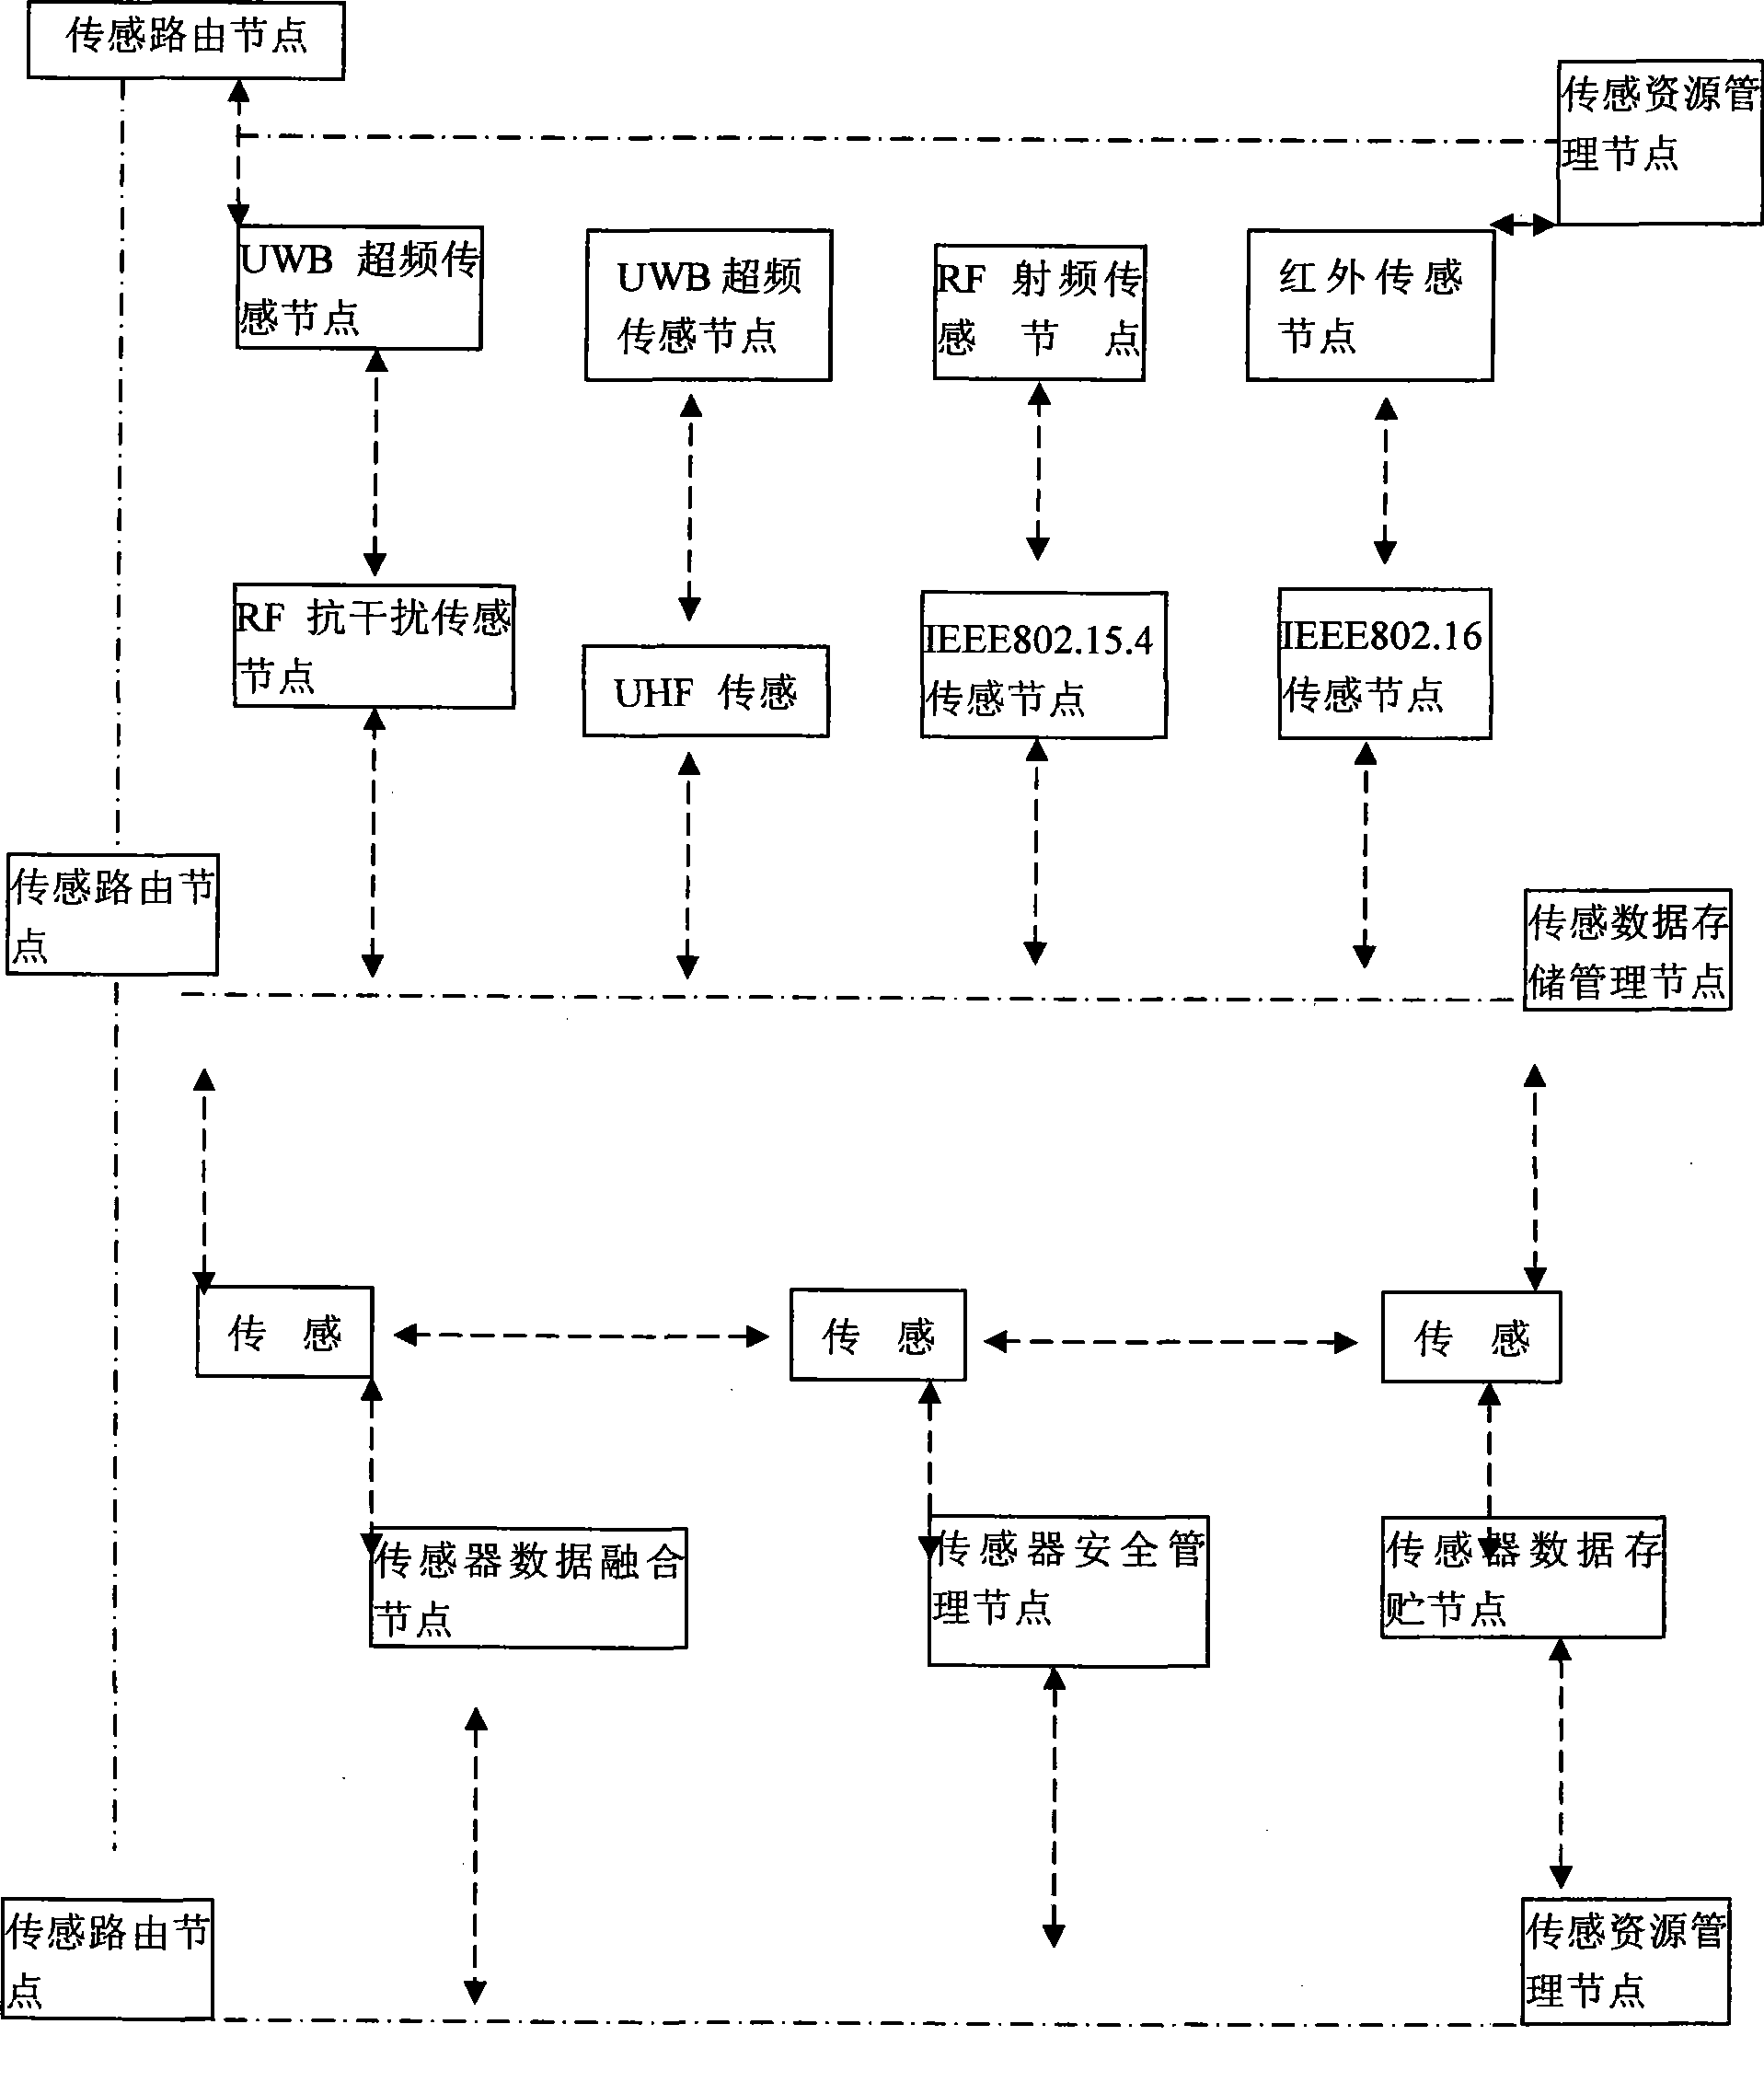 Automobile auxiliary control and driving system based on self-adapting sensor network